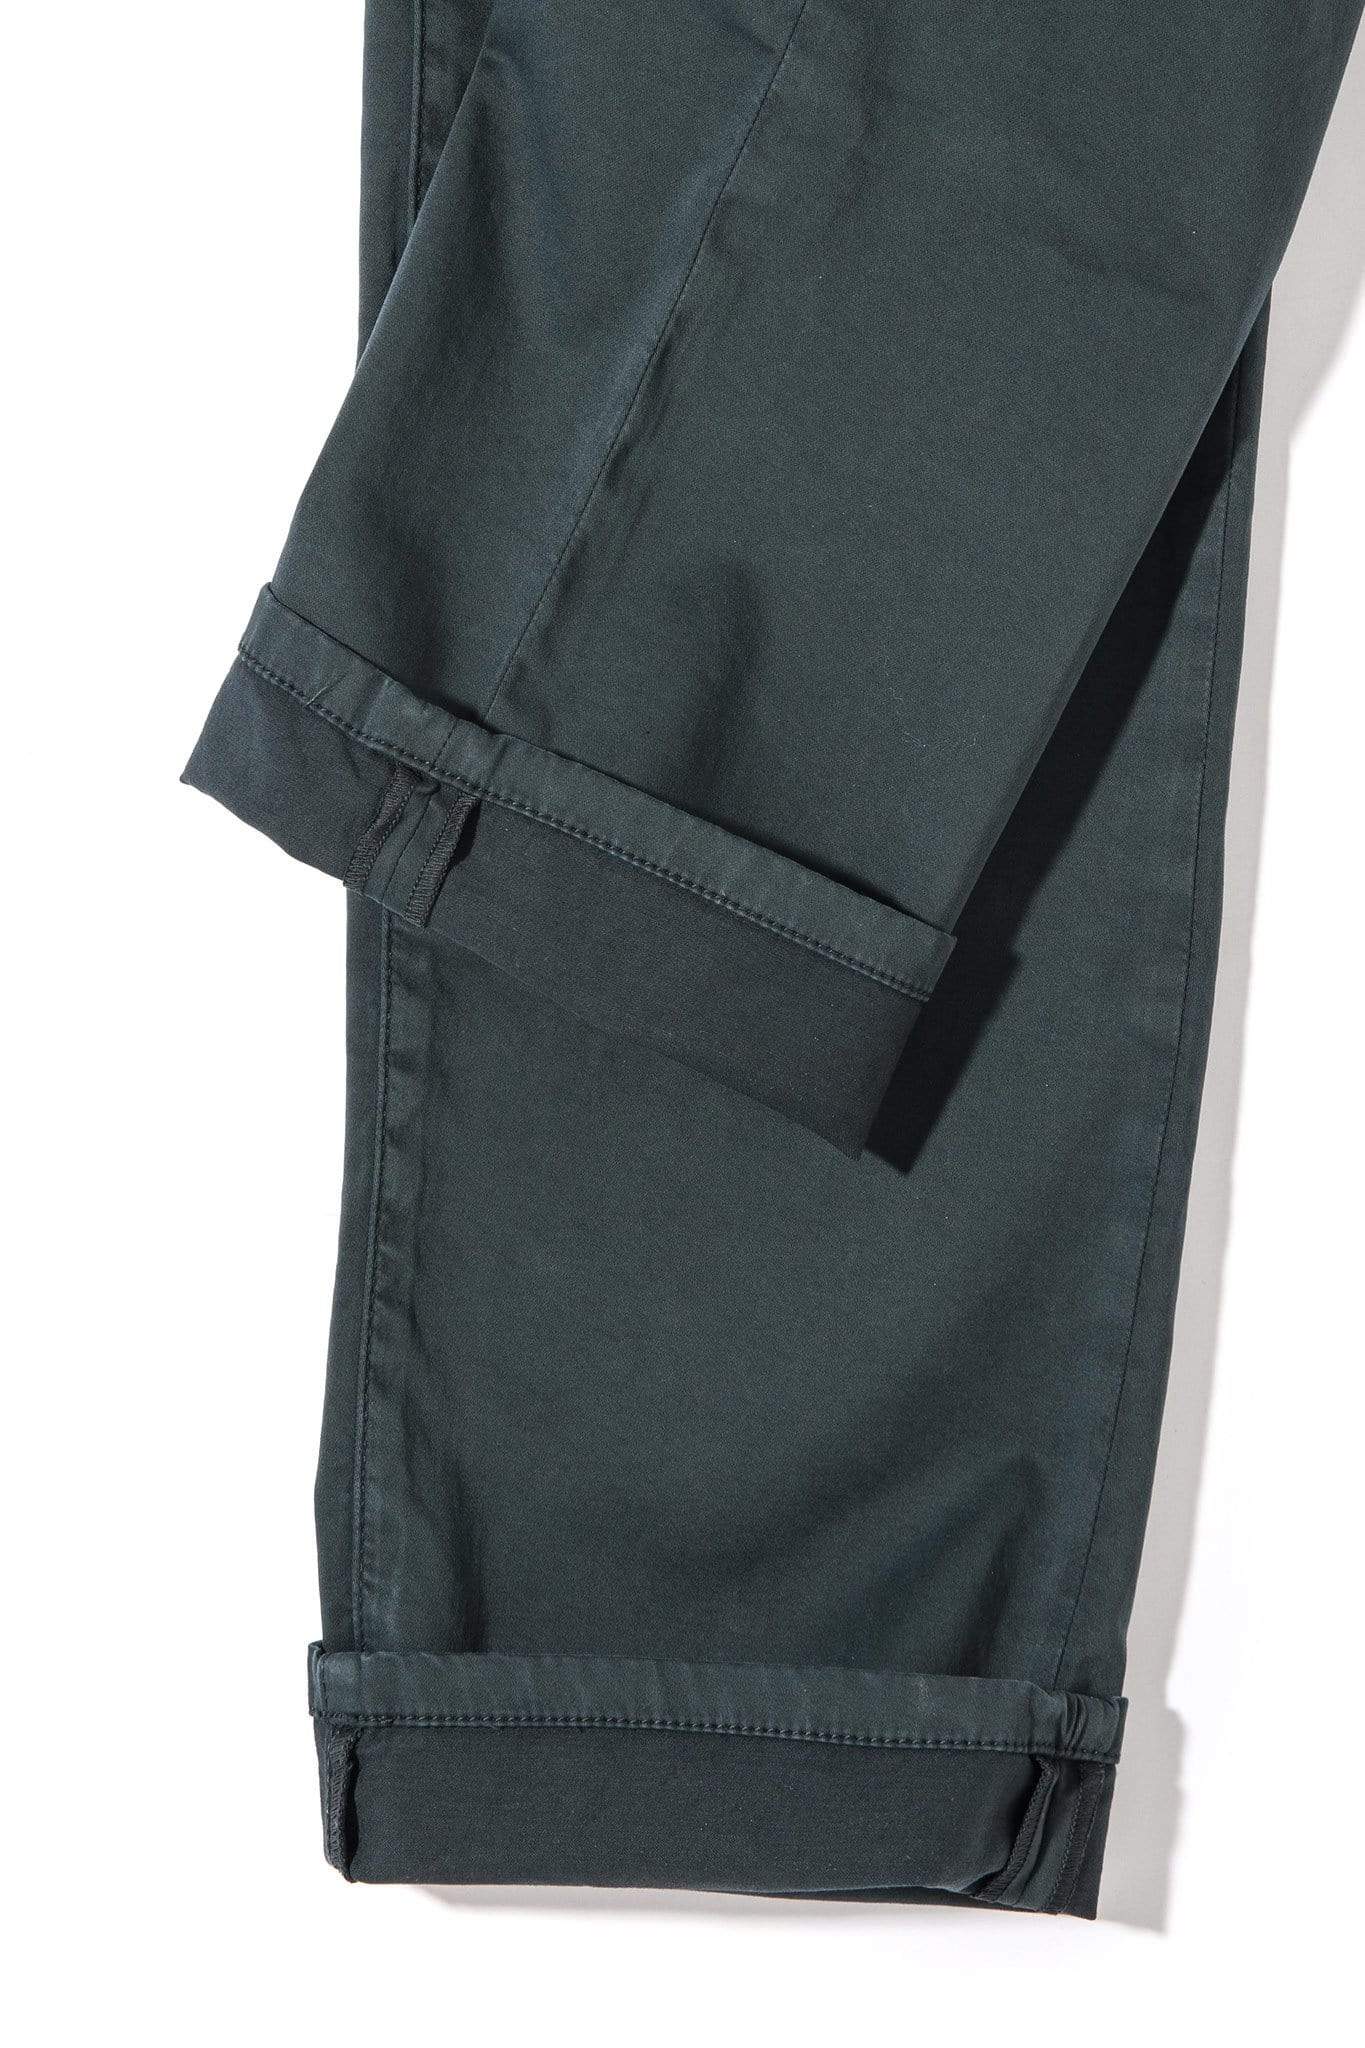 Yuma Soft Touch In Verde Loden | Mens - Pants - 5 Pocket | Teleria Zed